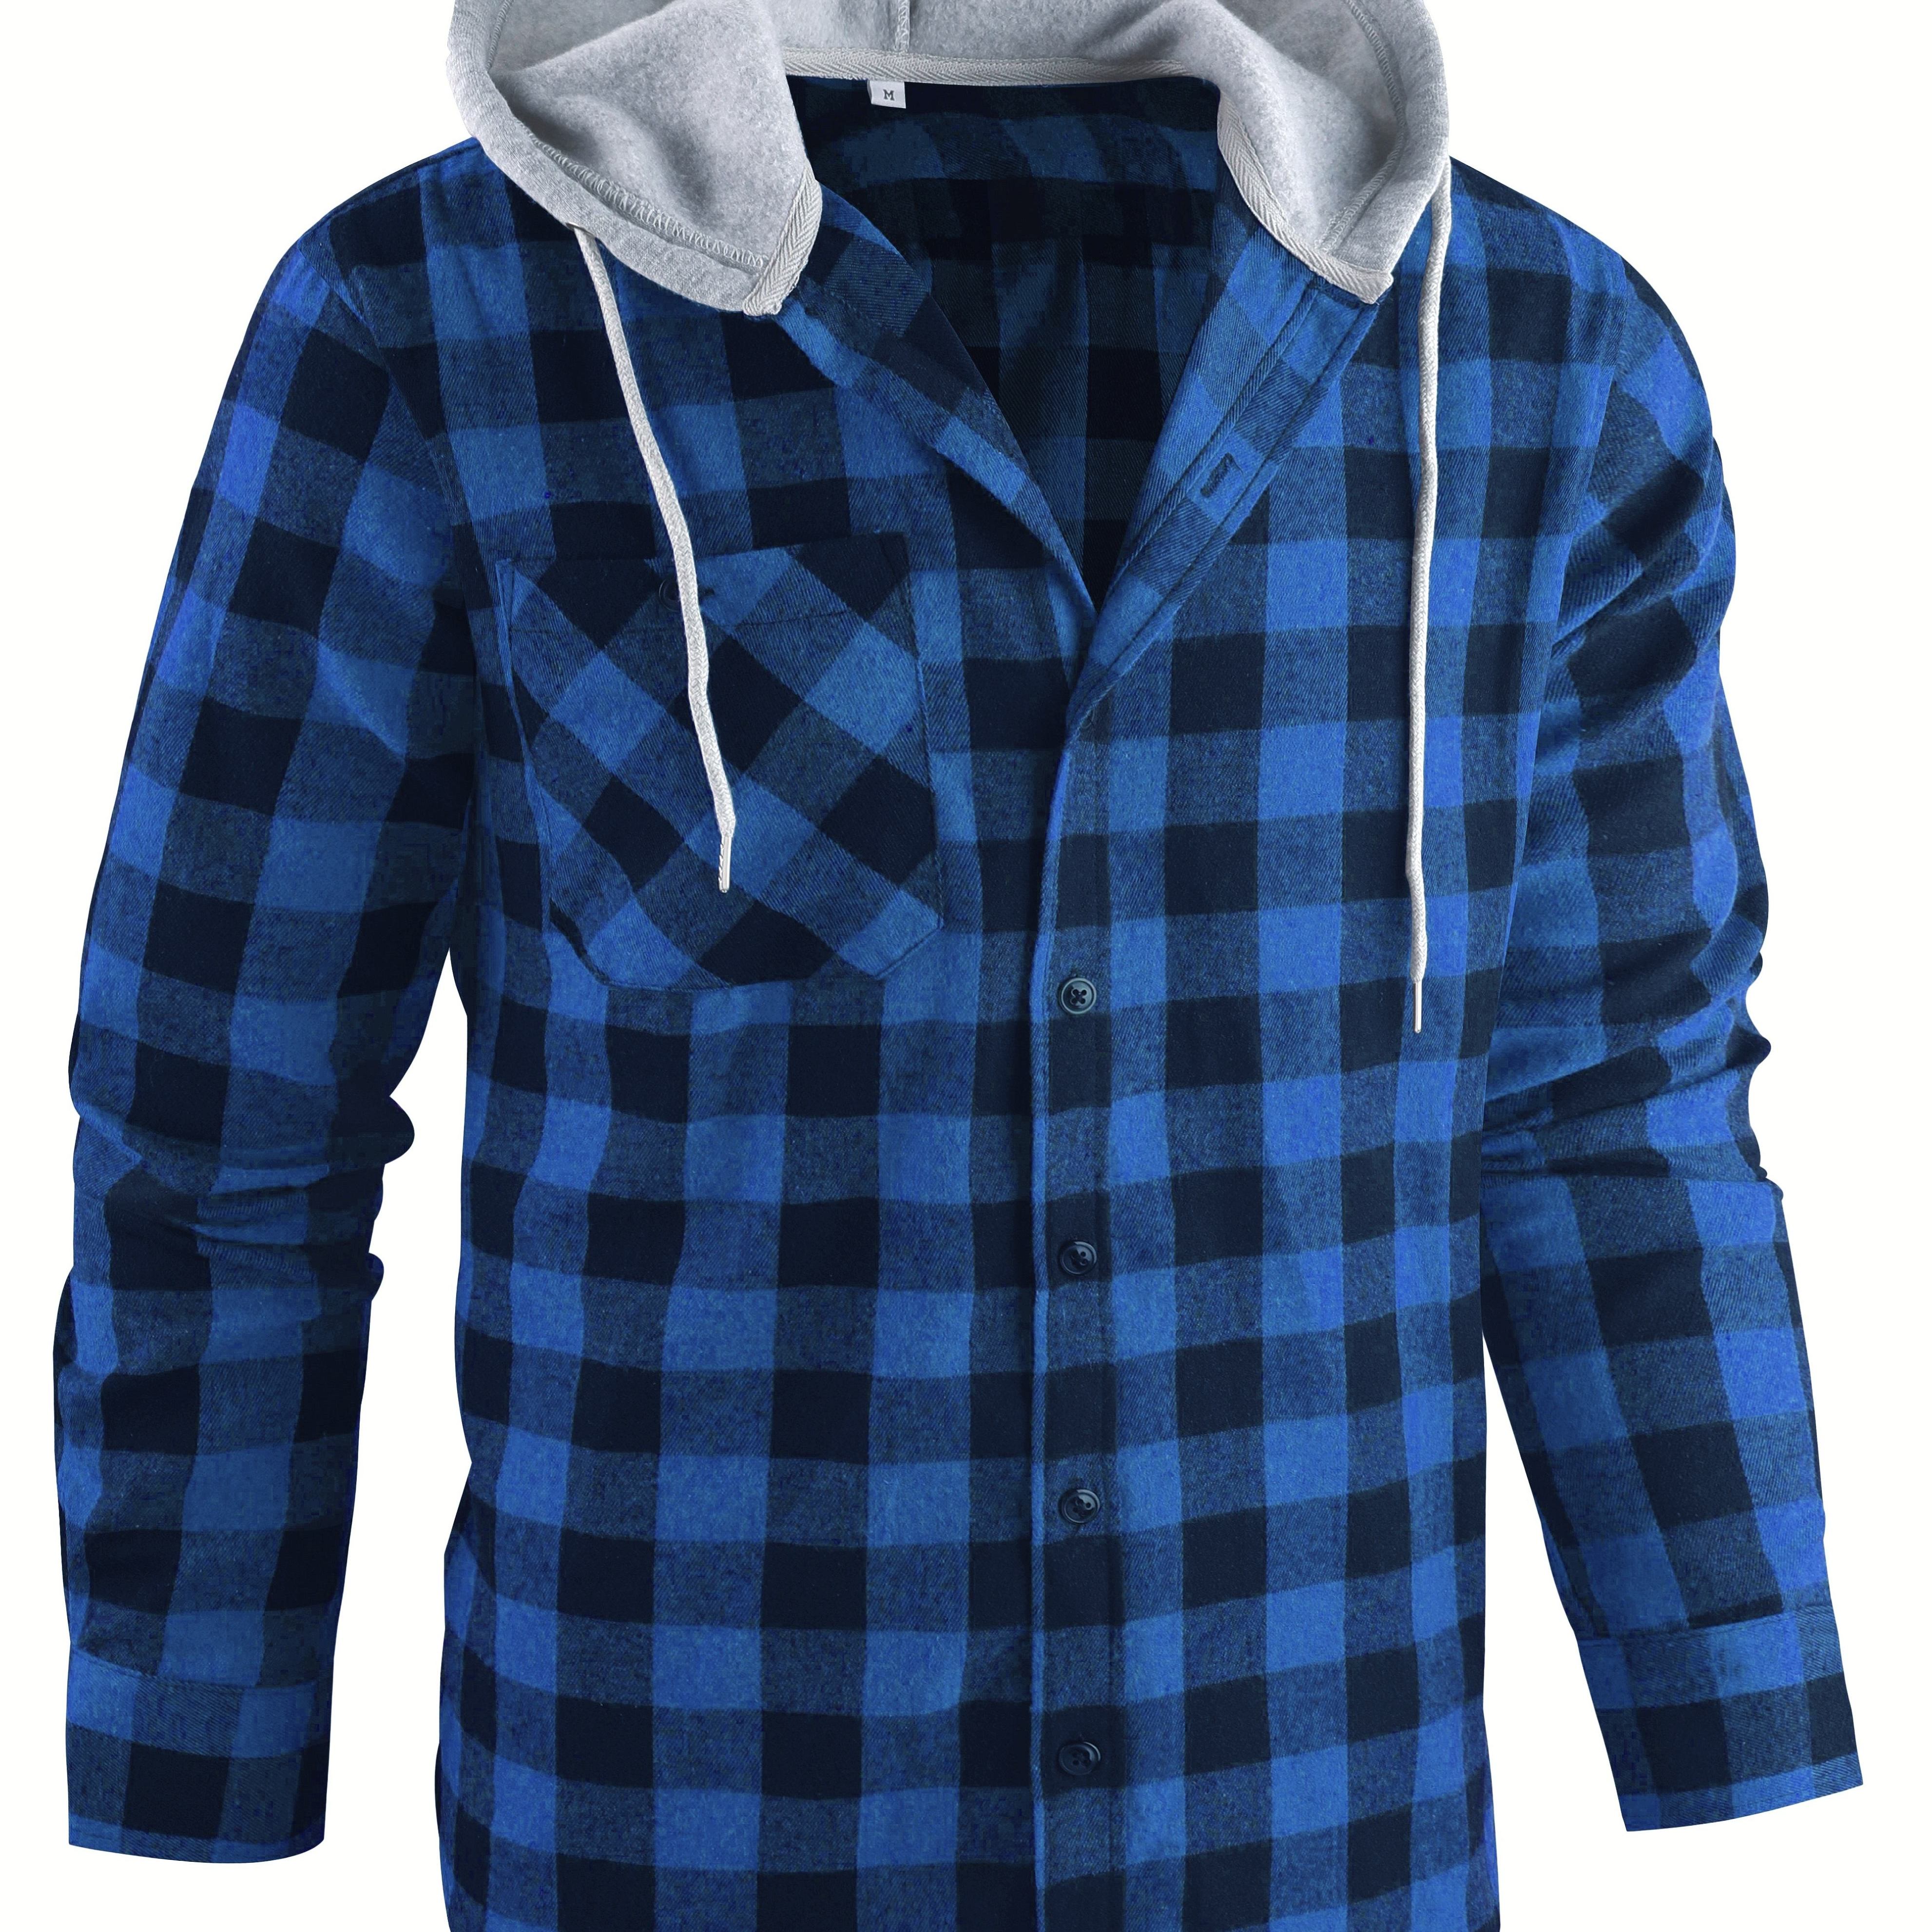 

Drawstring Hooded Flannel Shirt, Men's Casual Various Colors Plaid Button Up Shirt For Spring Summer